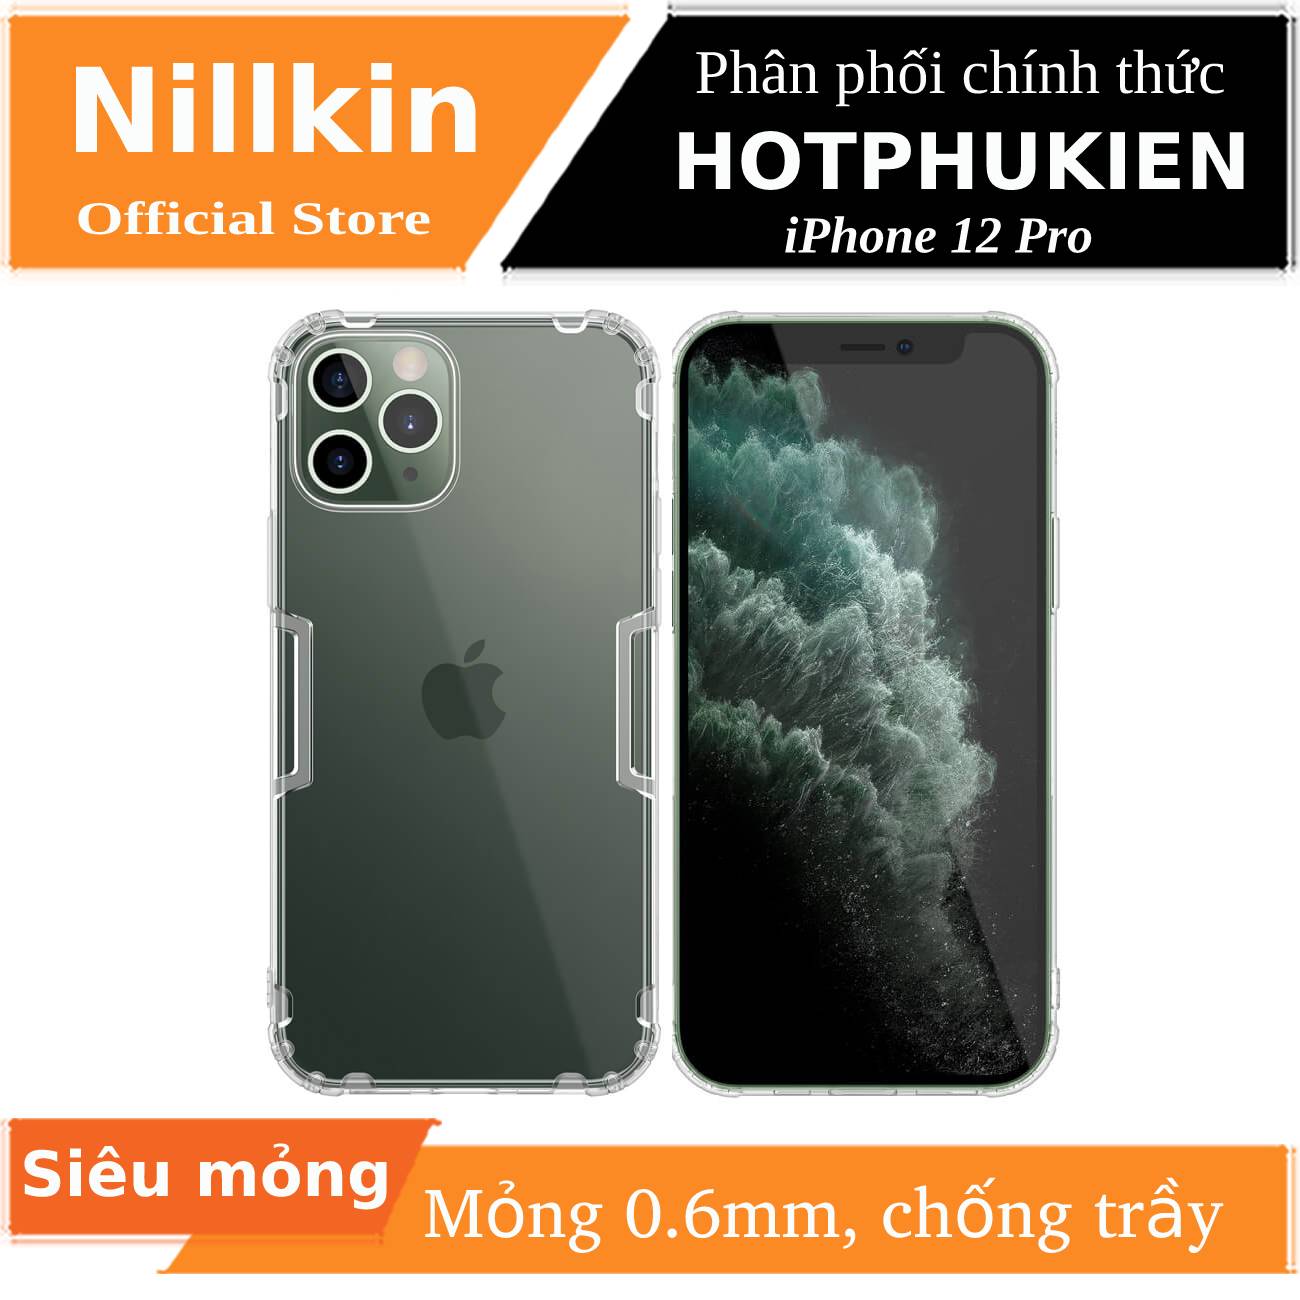 Ốp lưng silicon trong suốt cho iPhone 12 / iPhone 12 Pro (6.1 inch) hiệu Nillkin mỏng 0.6mm